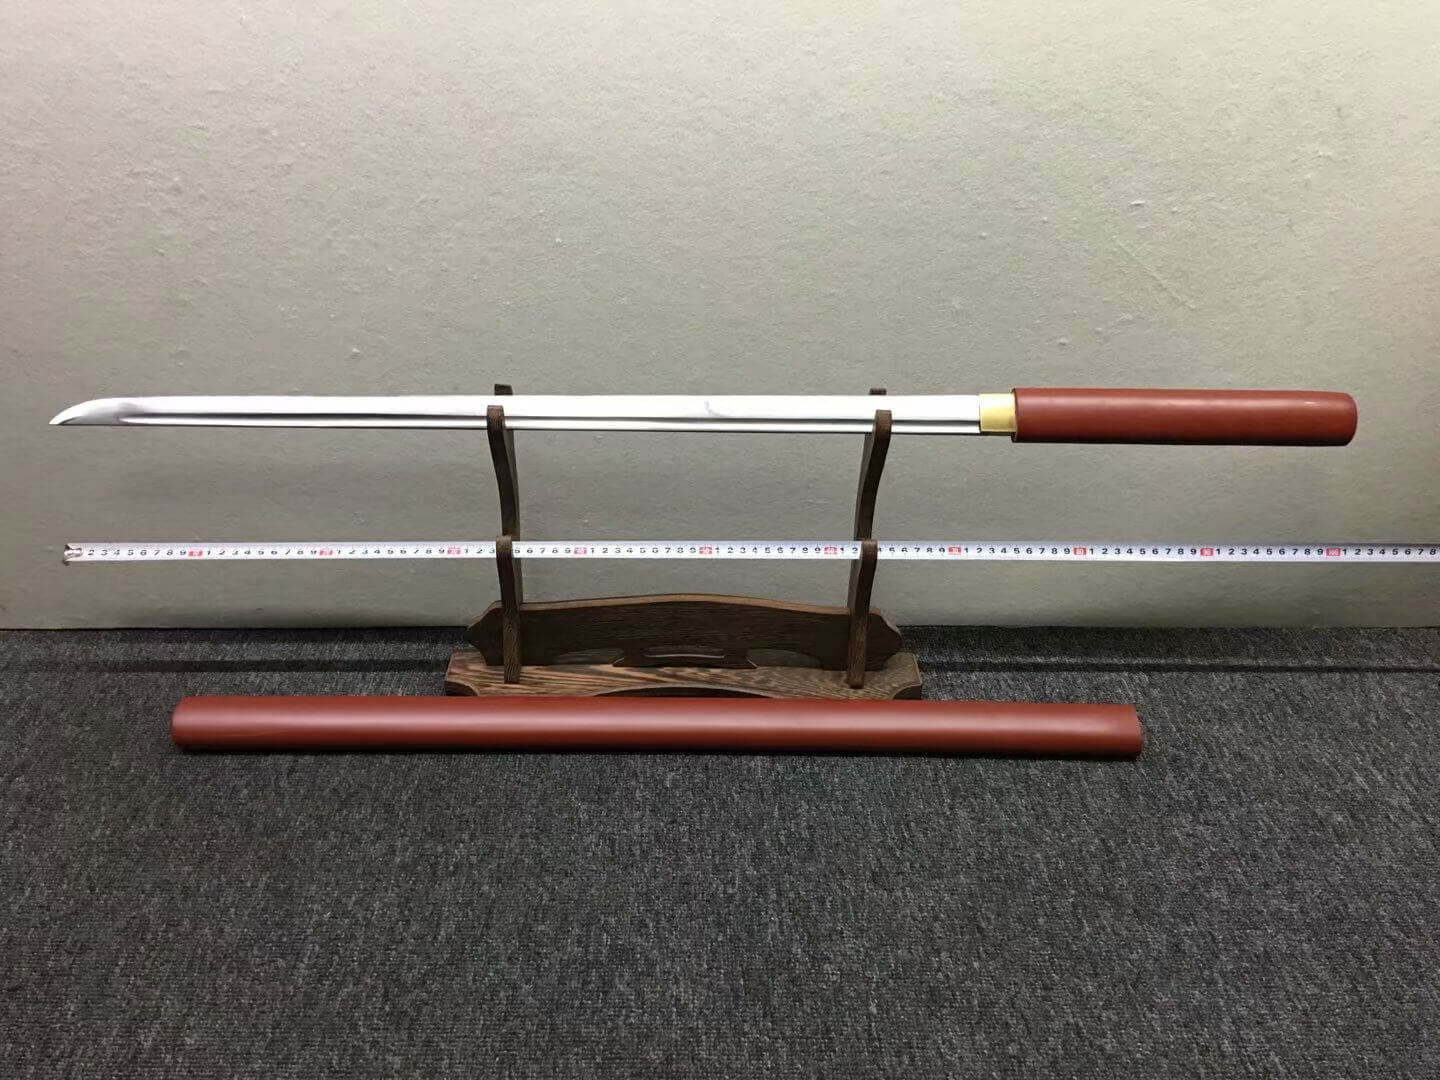 Ninja sword,Medium carbon steel,Red scabbard,Alloy fitting,Full tang - Chinese sword shop